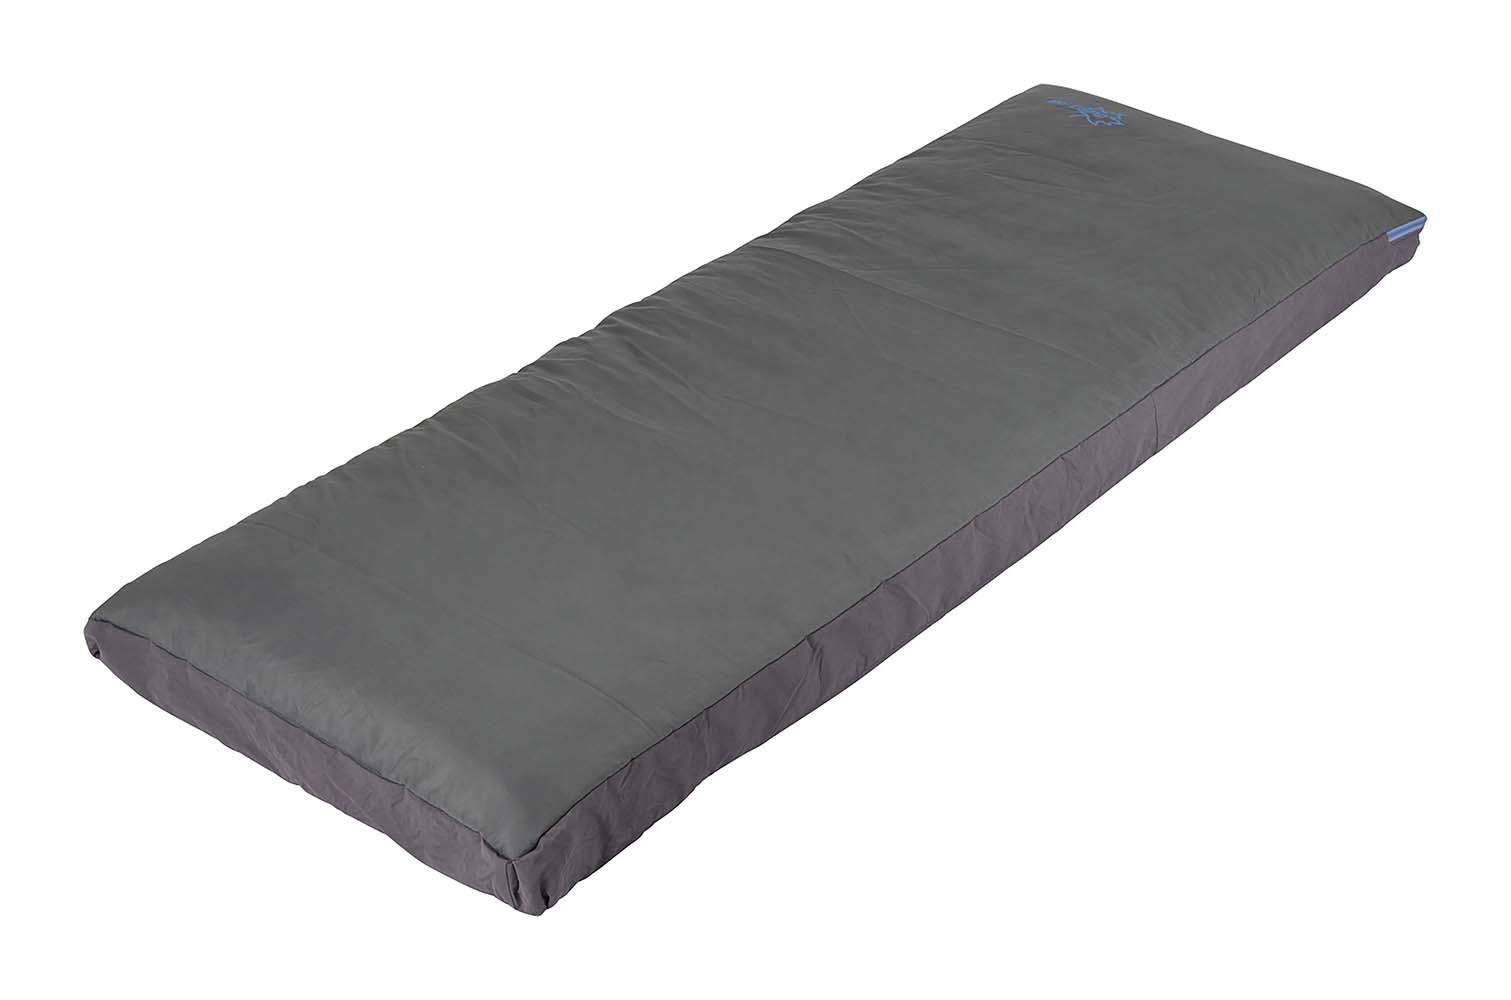 3505900 An air bed cover that ensures good insulation from ground cold. In addition, the air bed cover adds an extra layer of comfort due to the soft 150 g/m² Hollow fiber filling and polyester top. Very easy to use due to the zipper opening. In addition, the air mattress cover is washable and connectable to other covers.